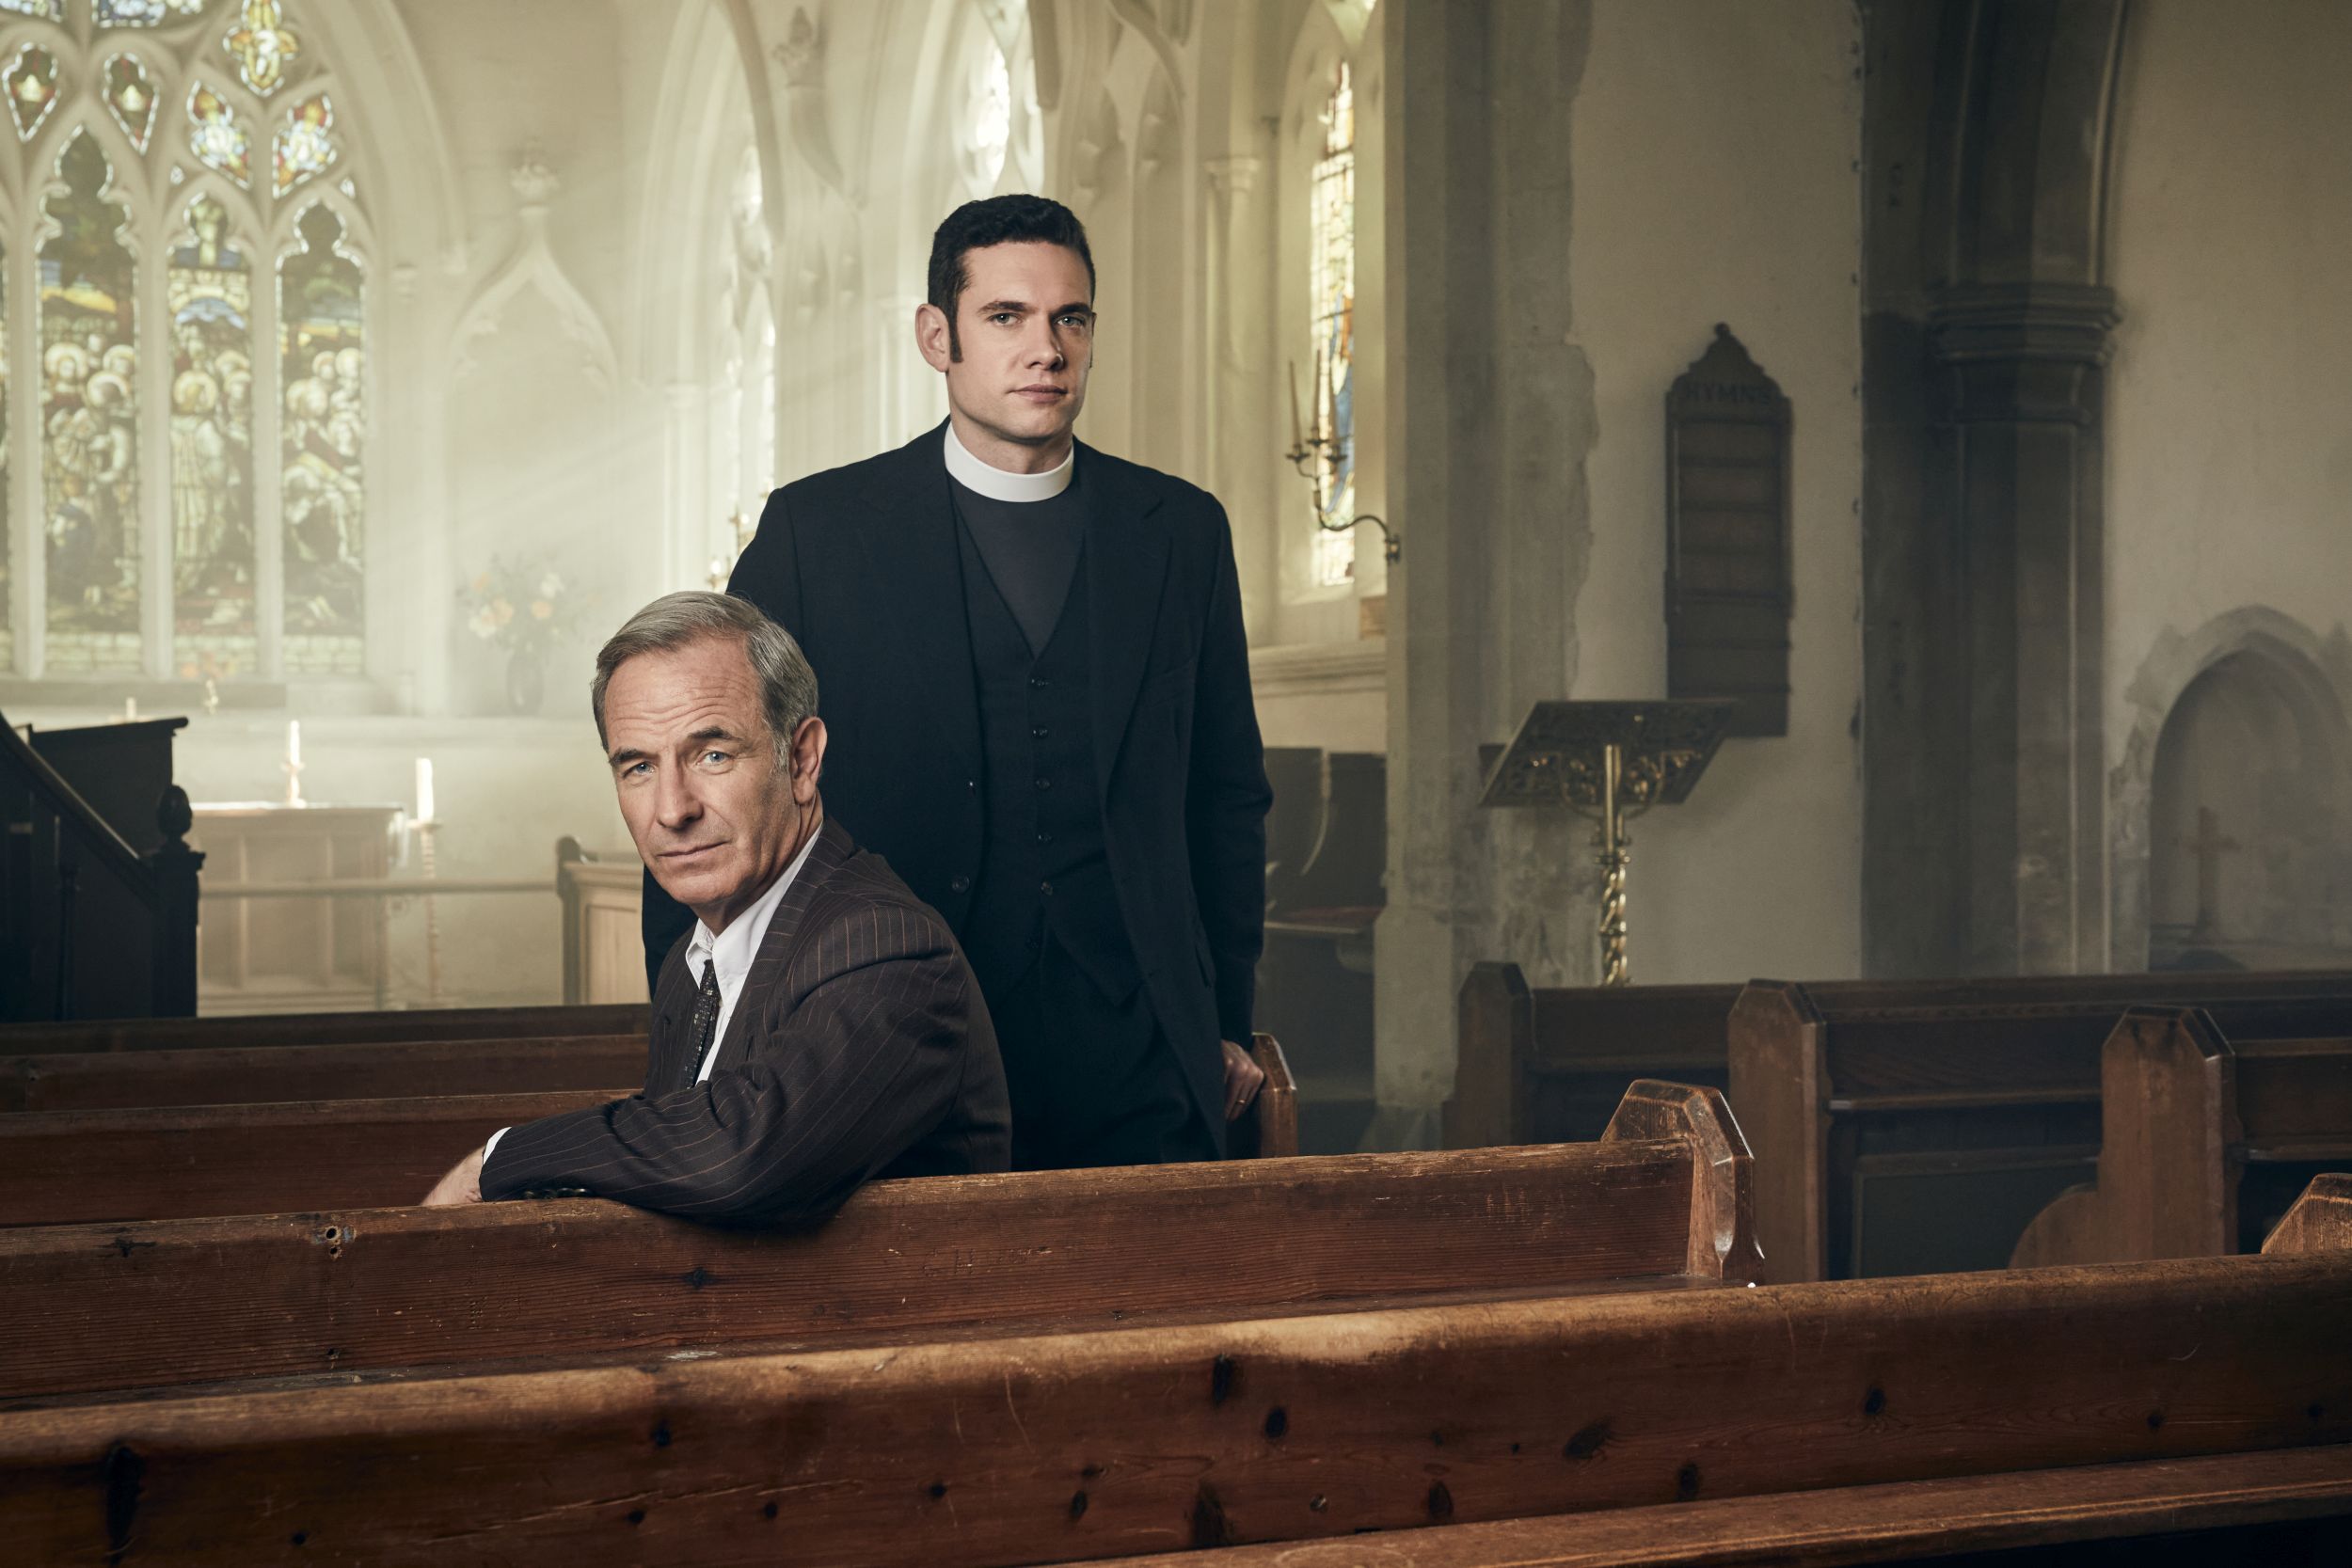 Tom Brittney as Will Davenport and Robson Green as Geordie Keating sitting in church pews in 'Grantchester' Season 8's Key Art 